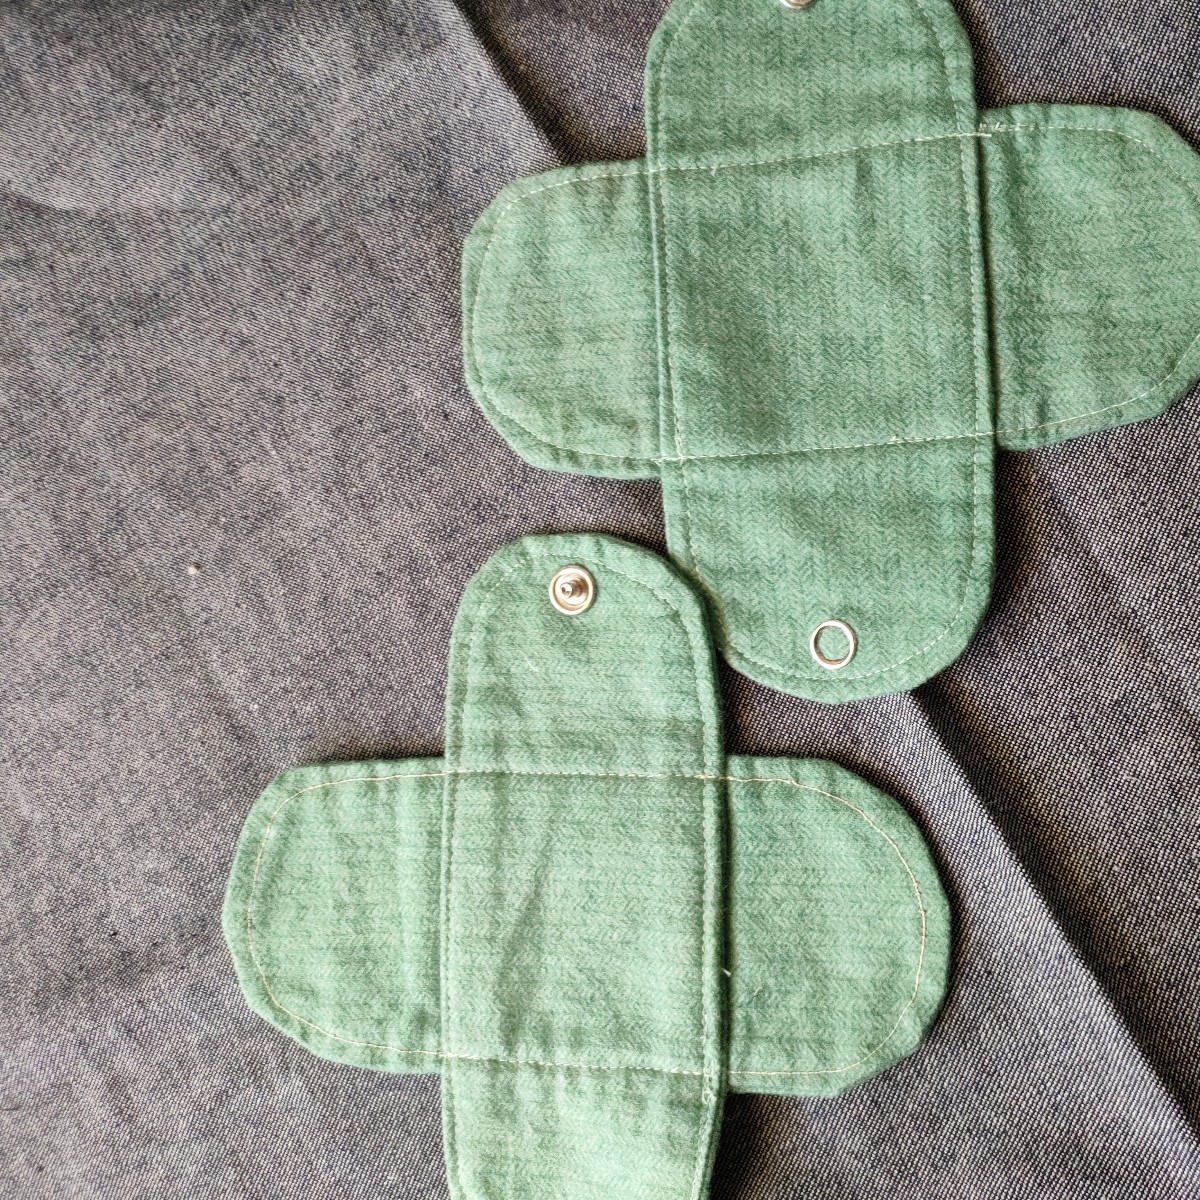  pantyliner green feather Cross type 2 sheets cotton flannel 17,5×17,5cm about. thing . length width intersection 